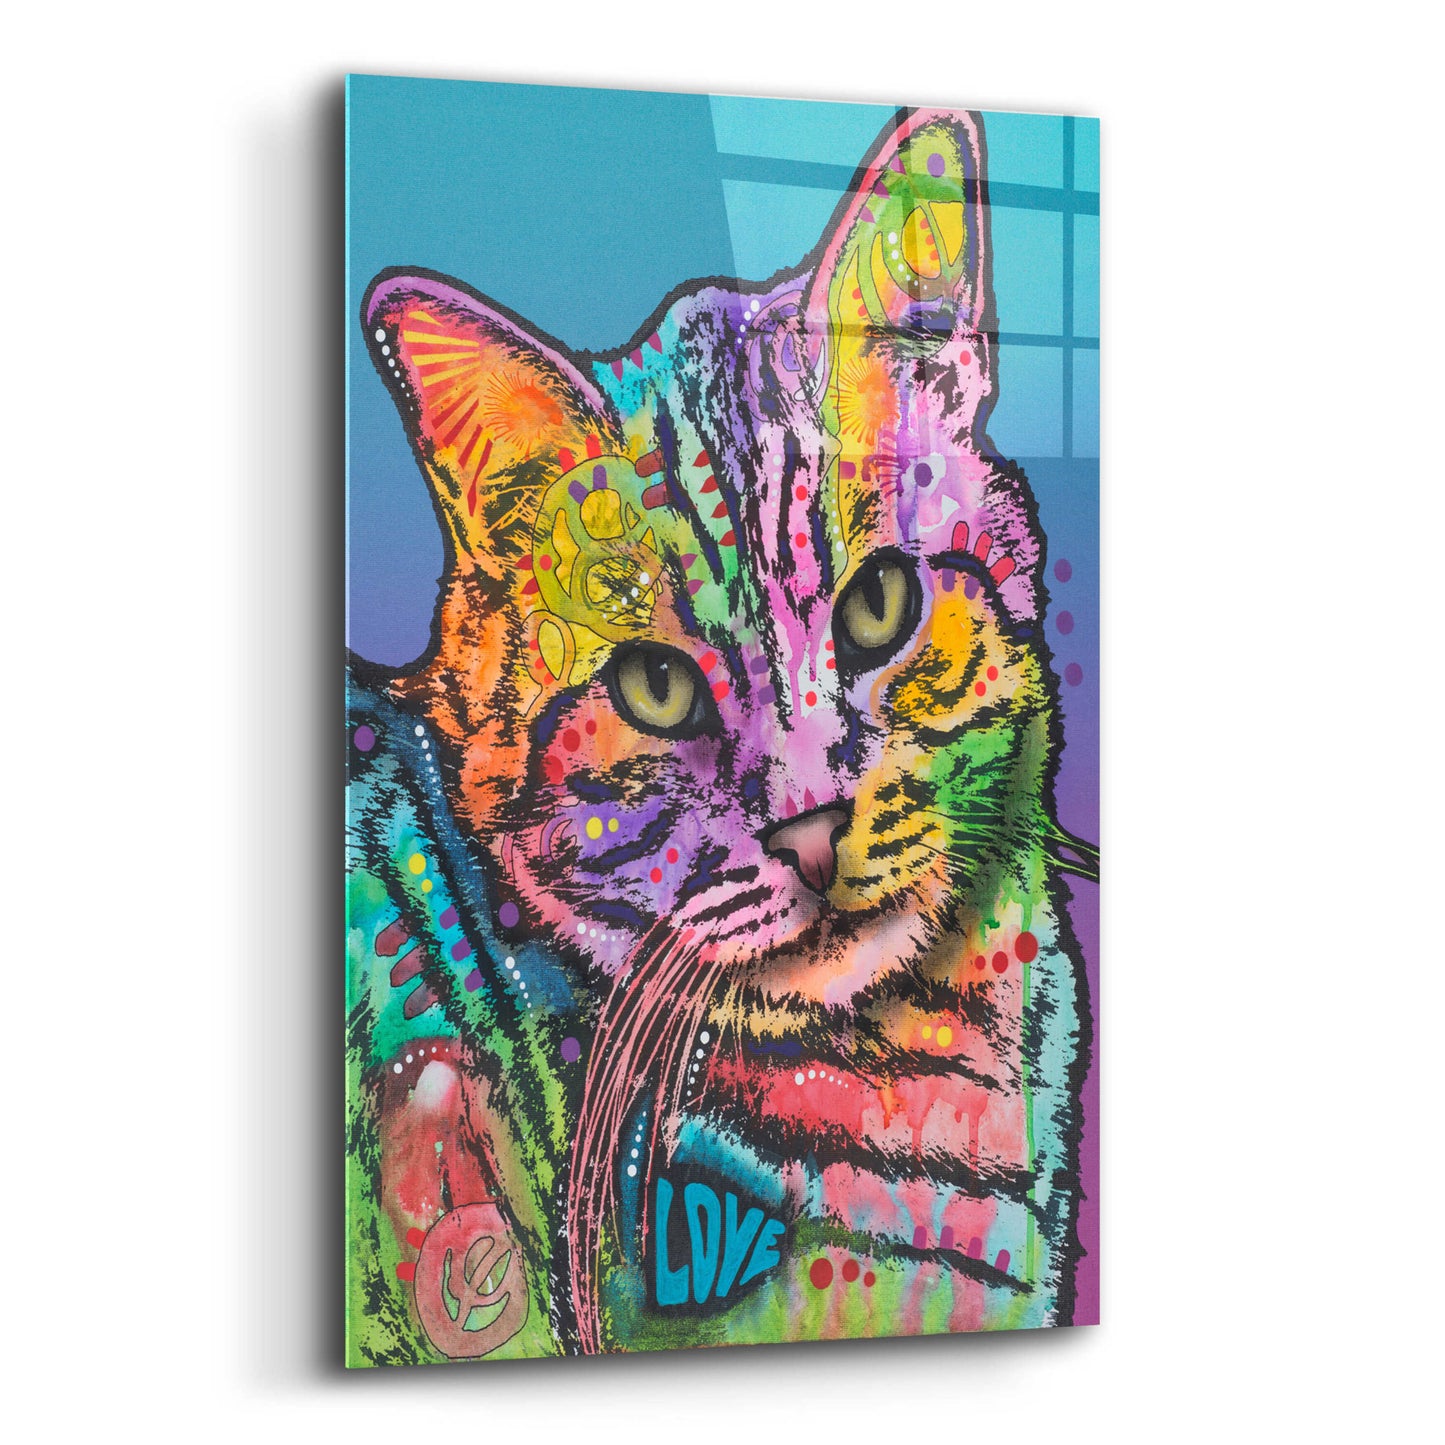 Epic Art 'Tigger' by Dean Russo, Acrylic Glass Wall Art,16x24